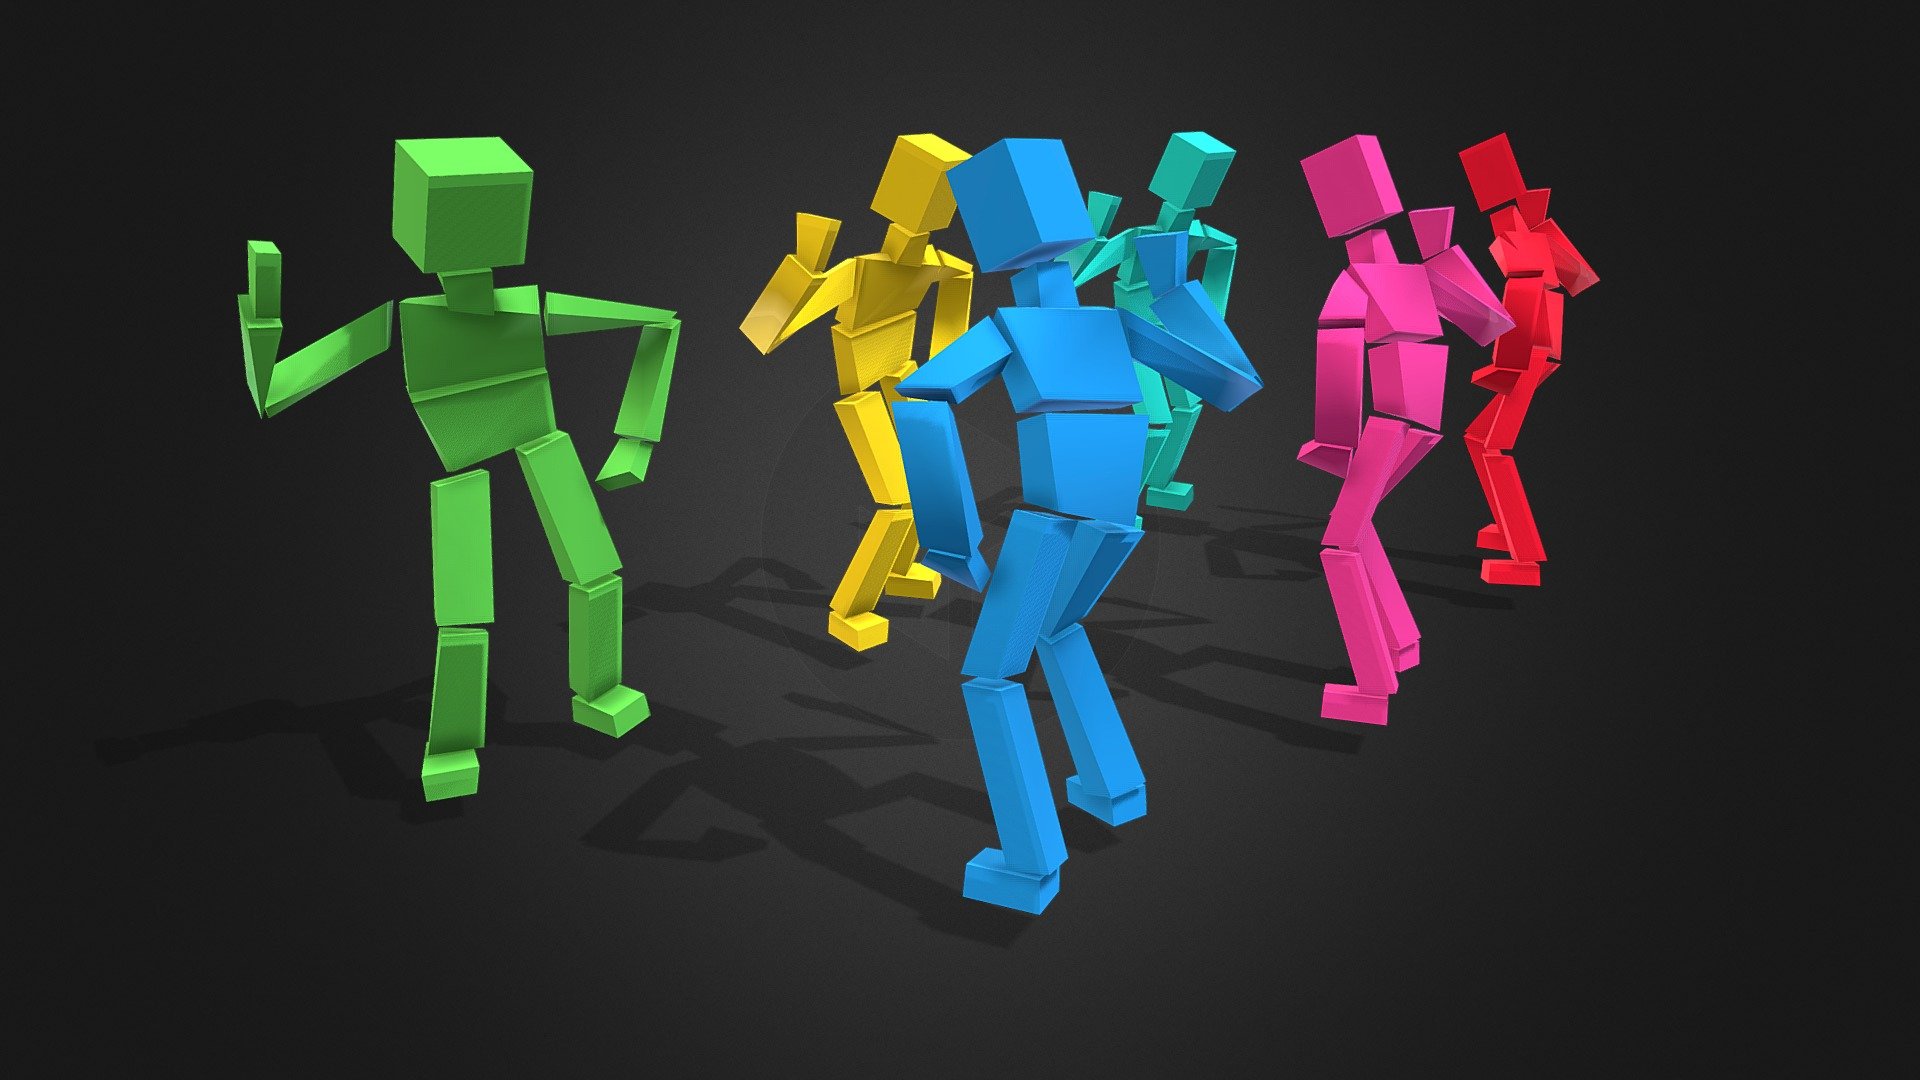 Characters low low poly from semple boxes dances 
If you liked it, I would allow me to do a &ldquo;Like